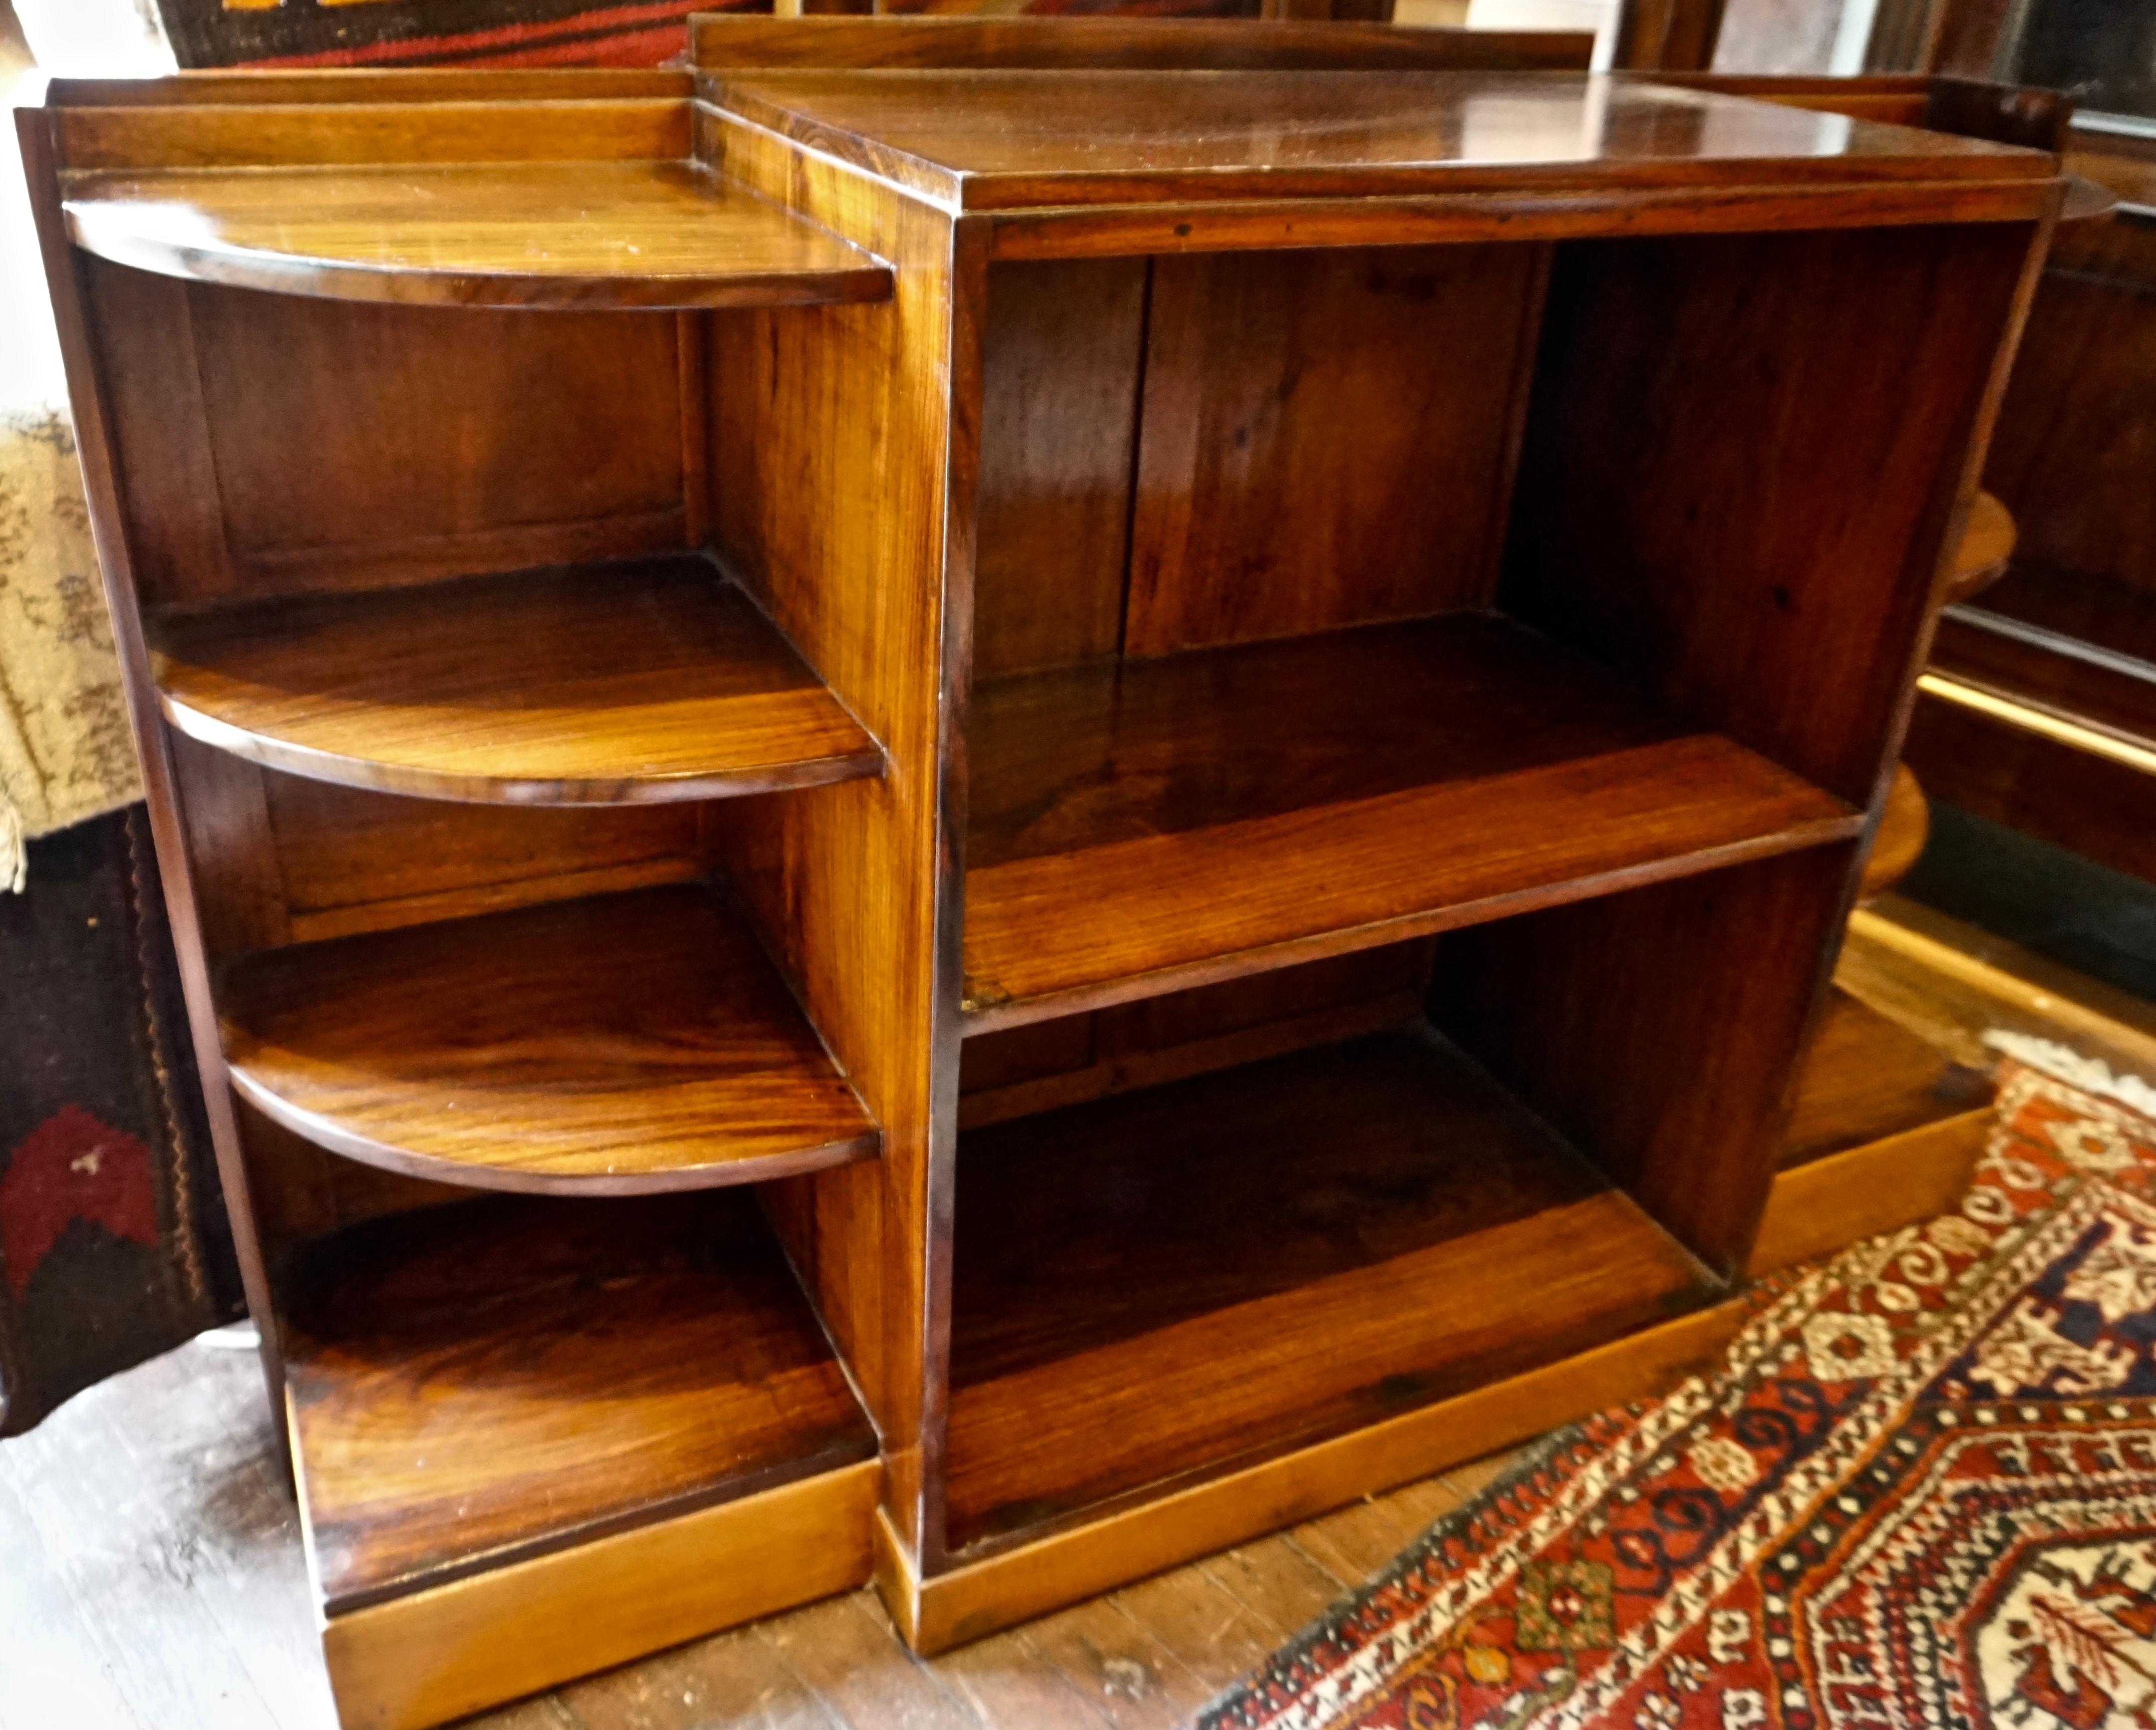 Solid Art Deco display cum bookshelf cabinet handcrafted from rosewood and teak with paneled hard back and curved edges. Shows free flowing grains and in good condition with a nice two-tone look. British India, circa 1930s.
 
 